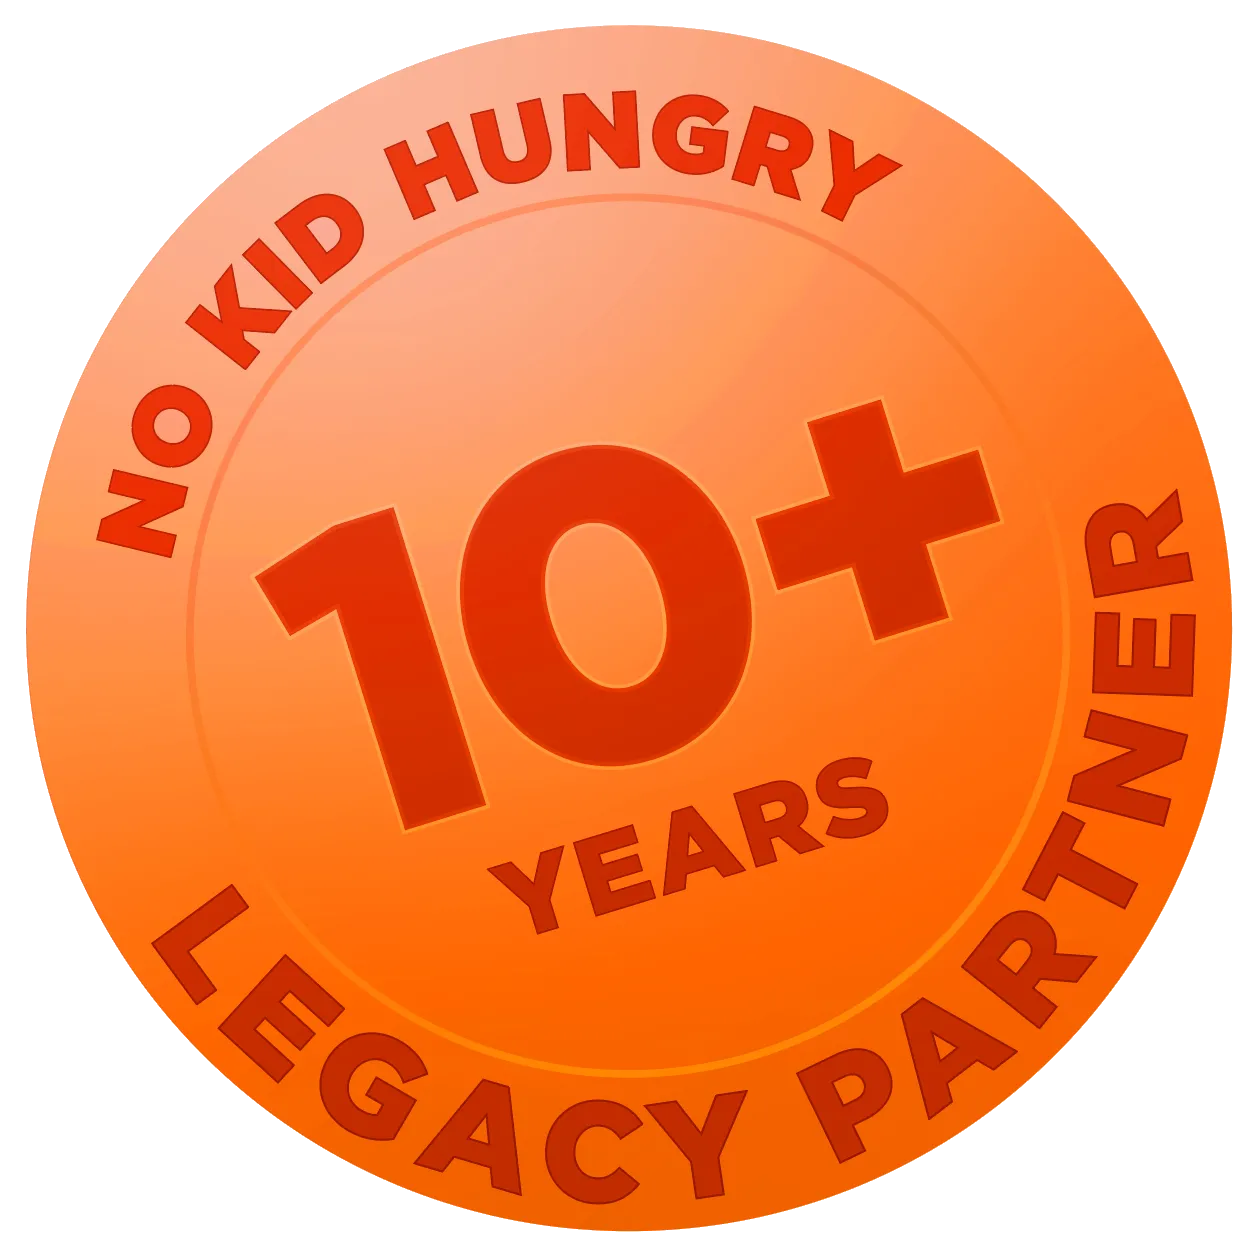 A badge certifying 10 years as a No Kid Hungry Partner